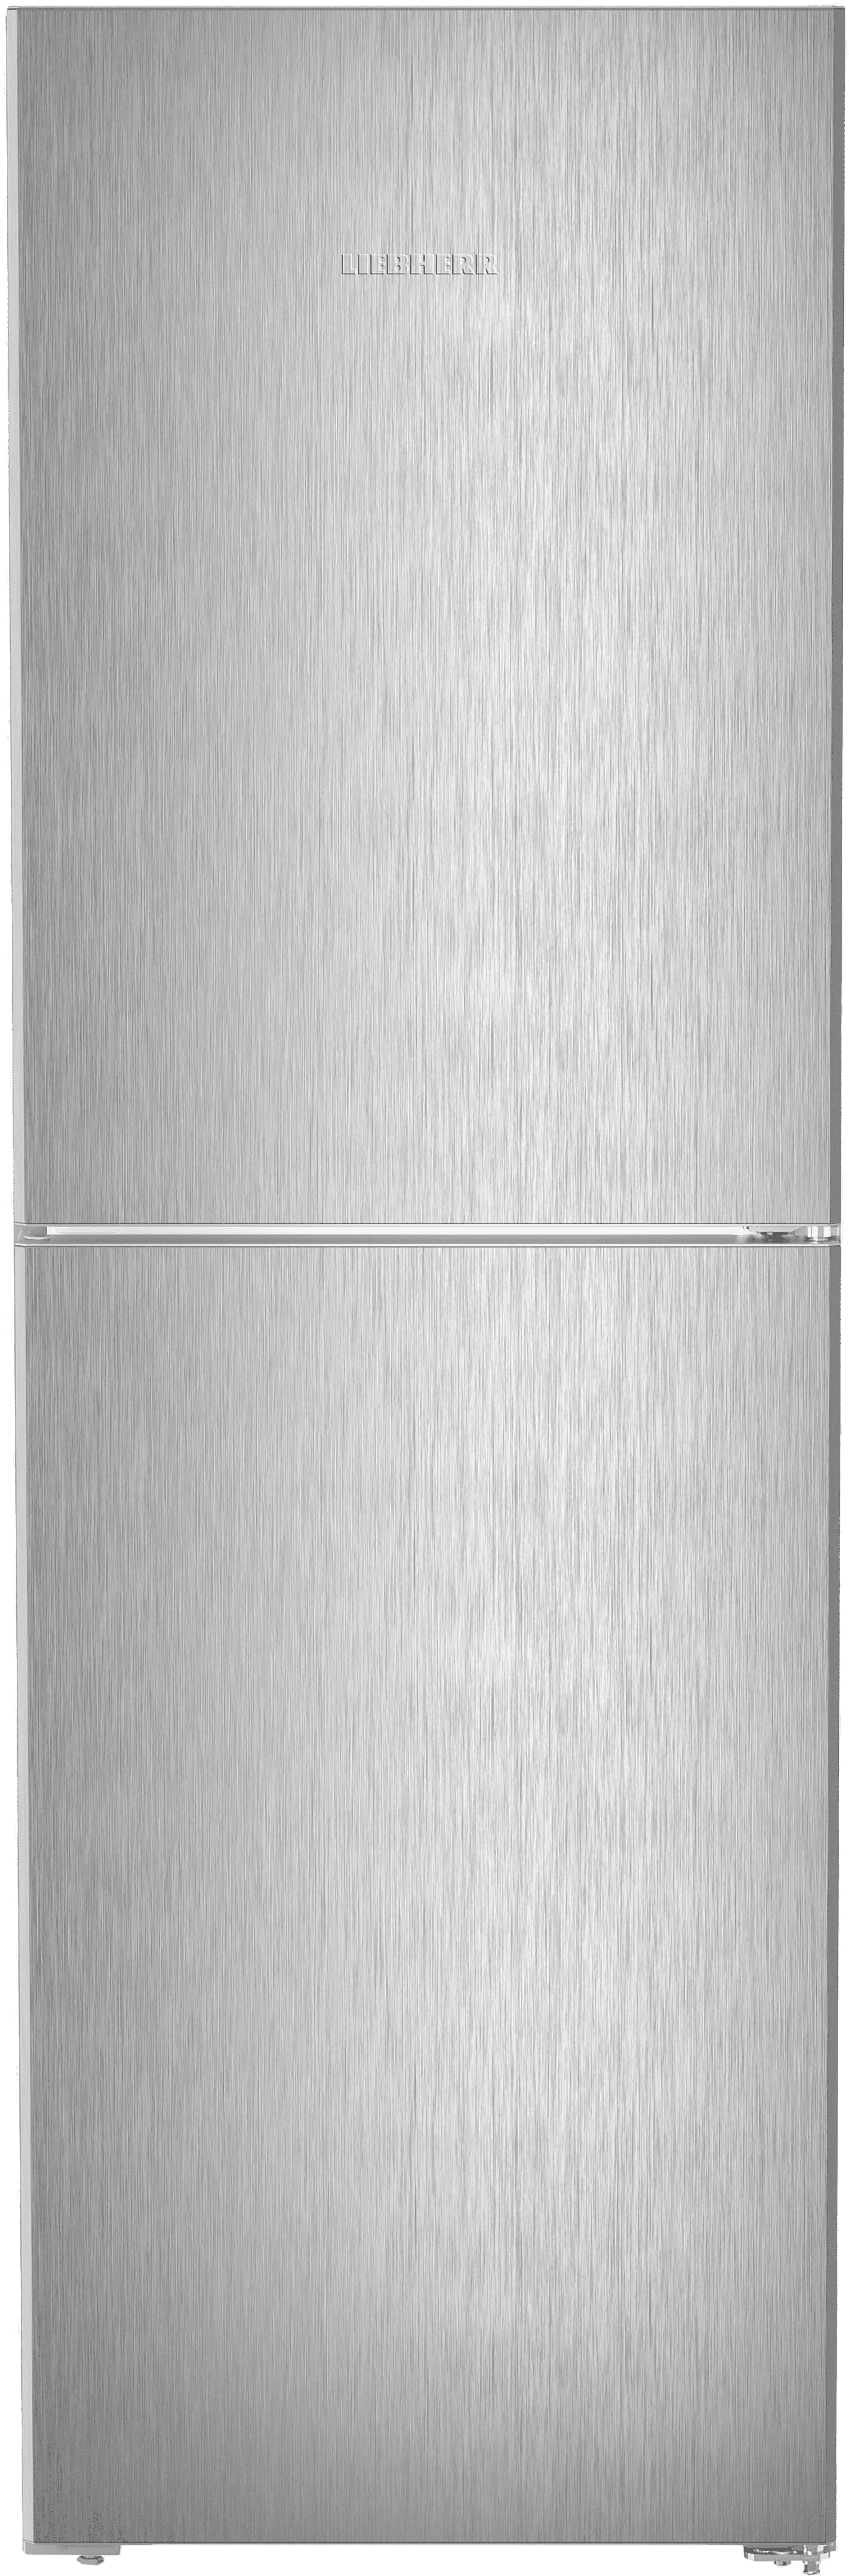 Liebherr CNsfd5204 50/50 Frost Free Fridge Freezer - Stainless Steel - D Rated, Stainless Steel